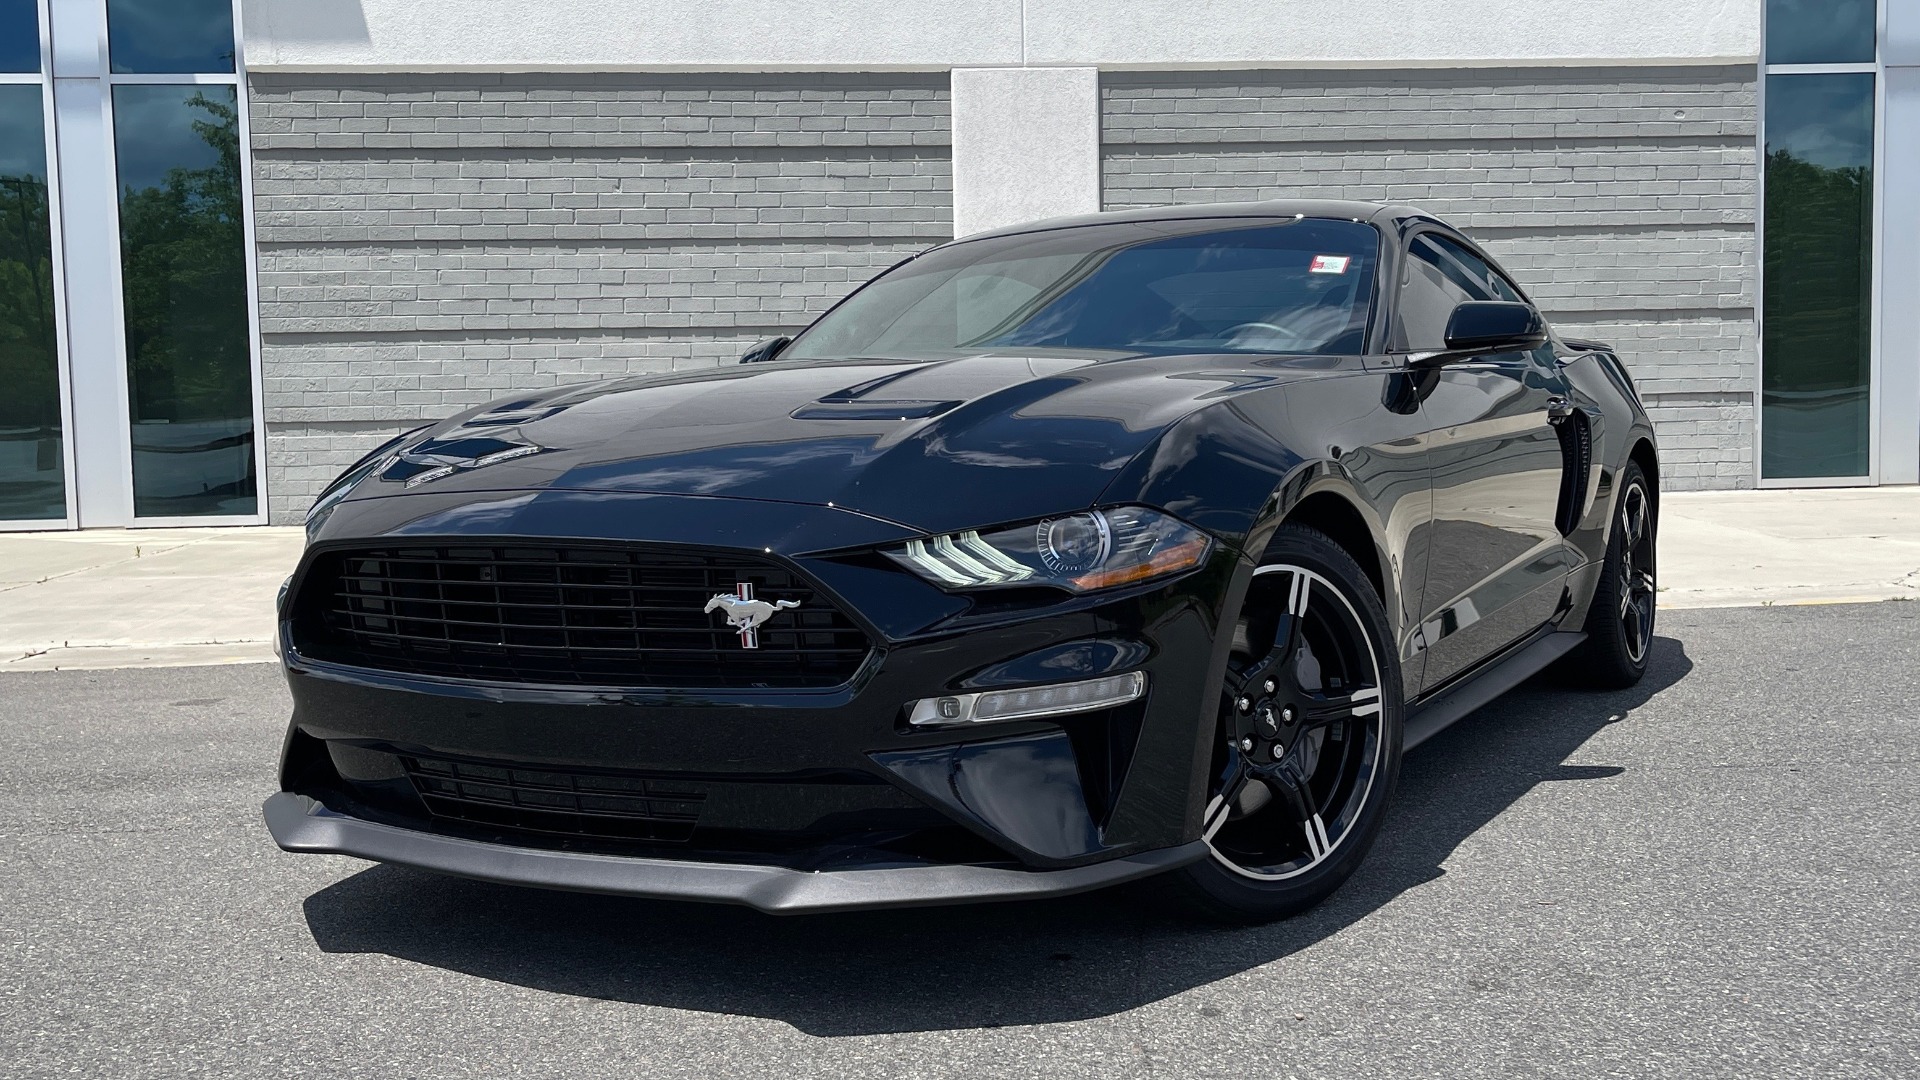 Ford Mustang Gt 2020